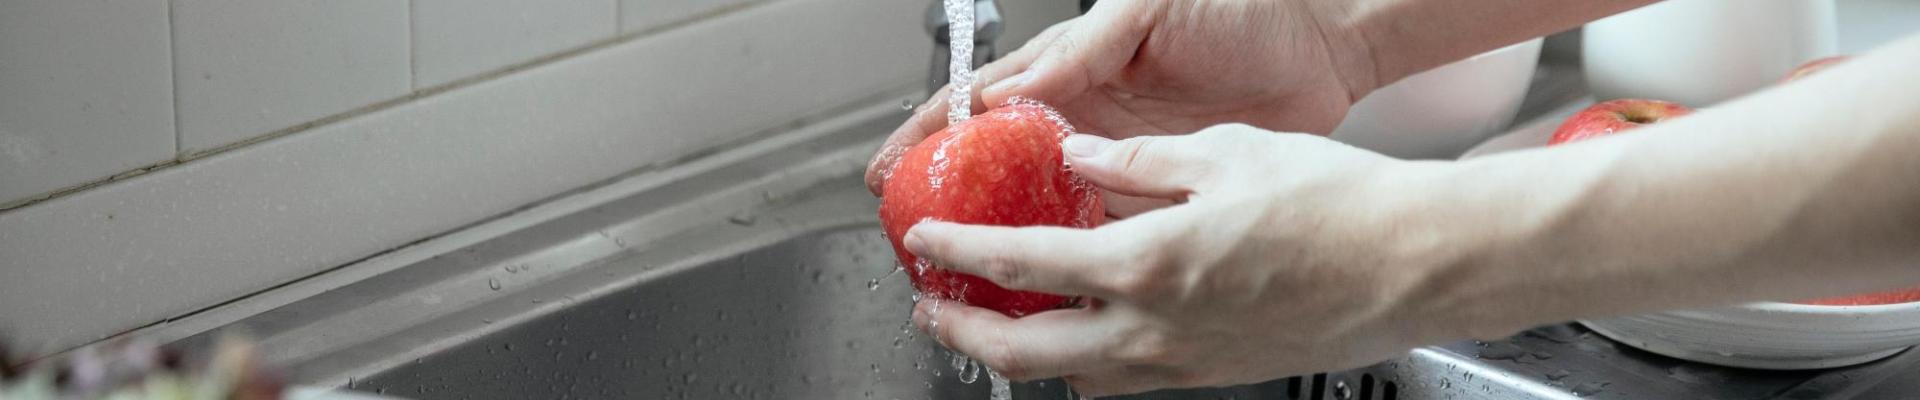 hands washing an apple at sink